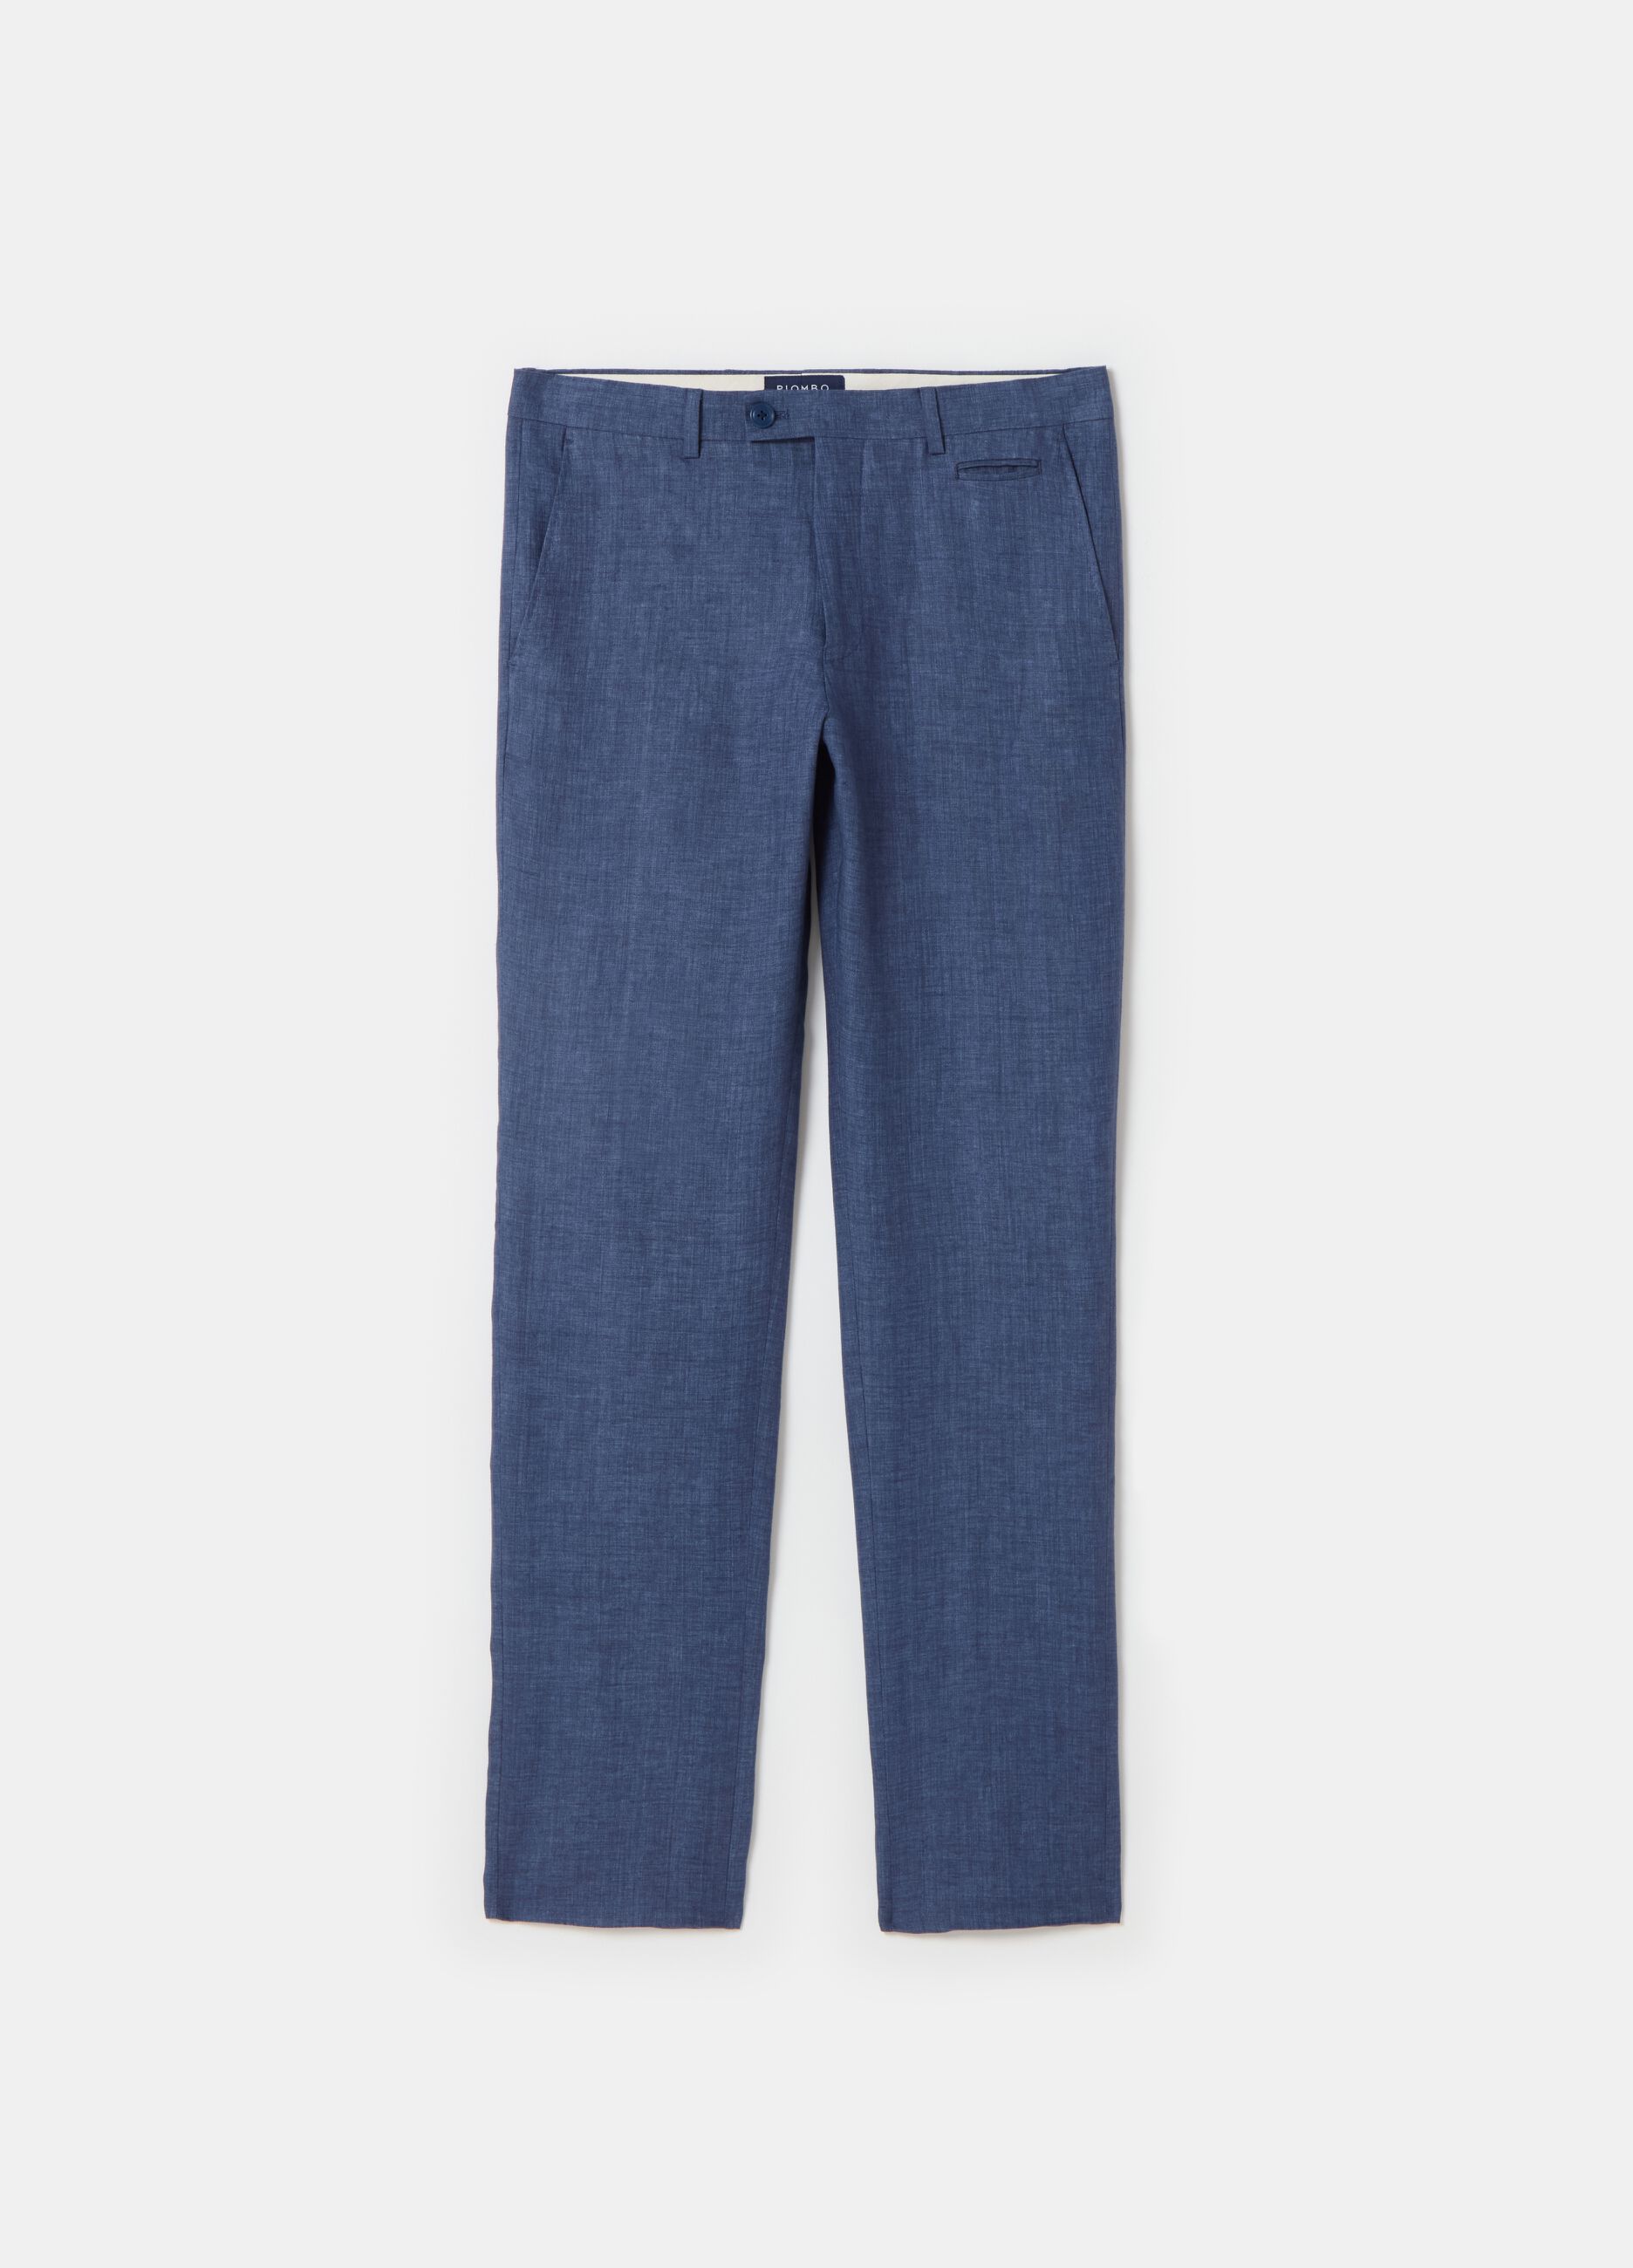 Contemporary chino trousers in linen